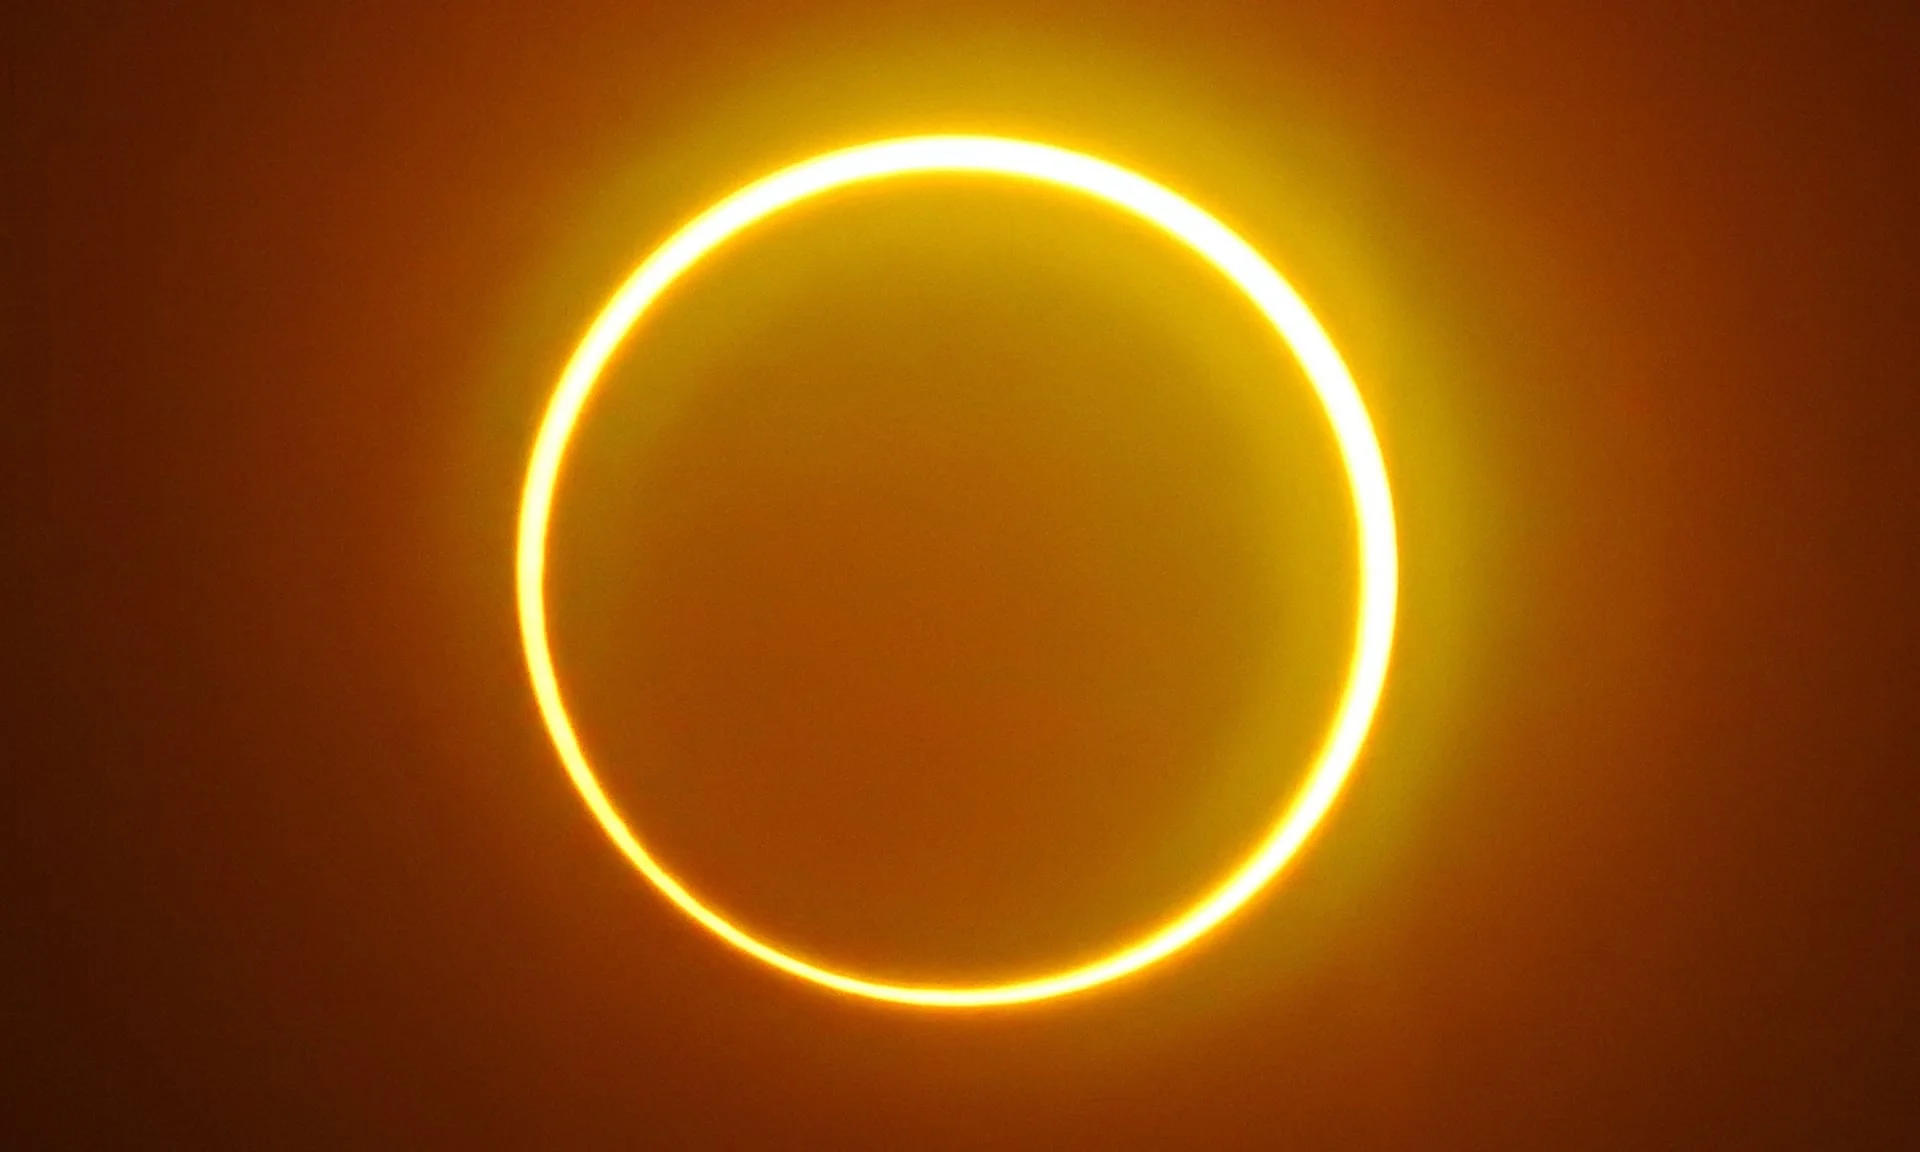 Chasing rare “Ring of Fire” annular solar eclipse in Africa and Asia